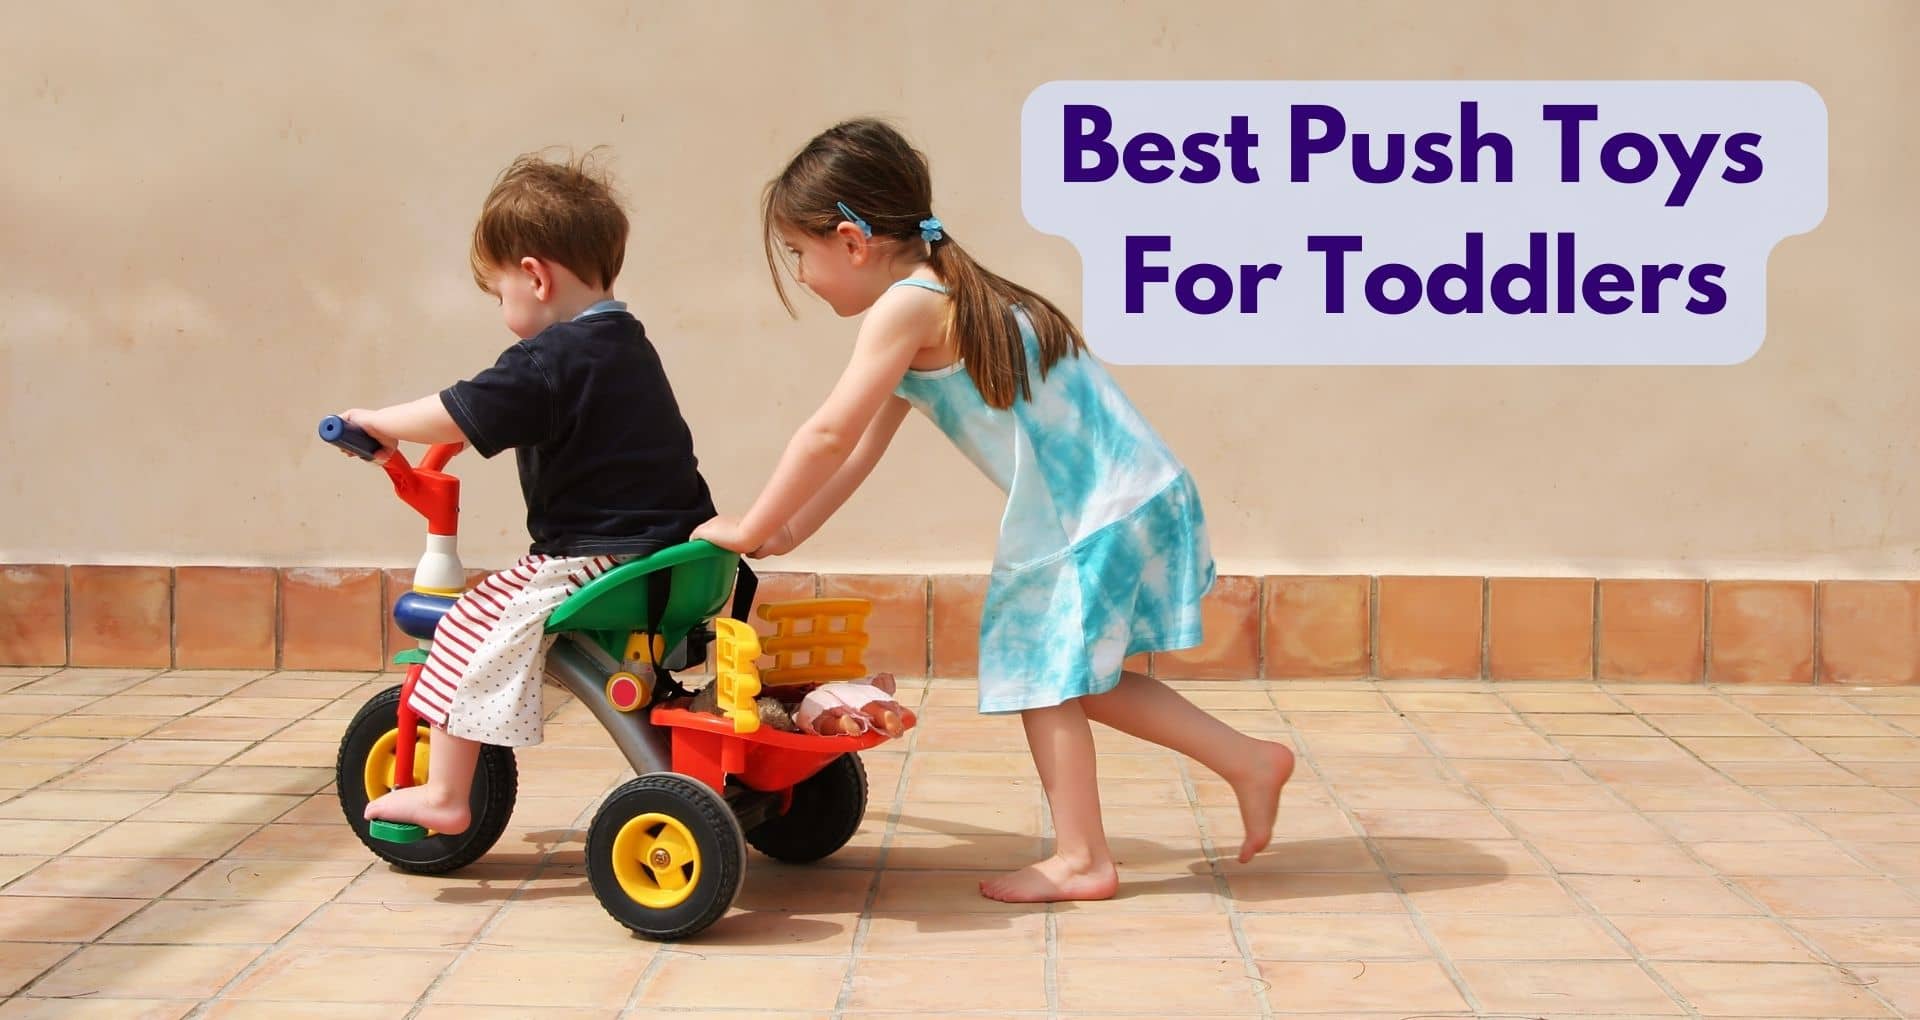 What Are The Best Push Toys For Toddlers